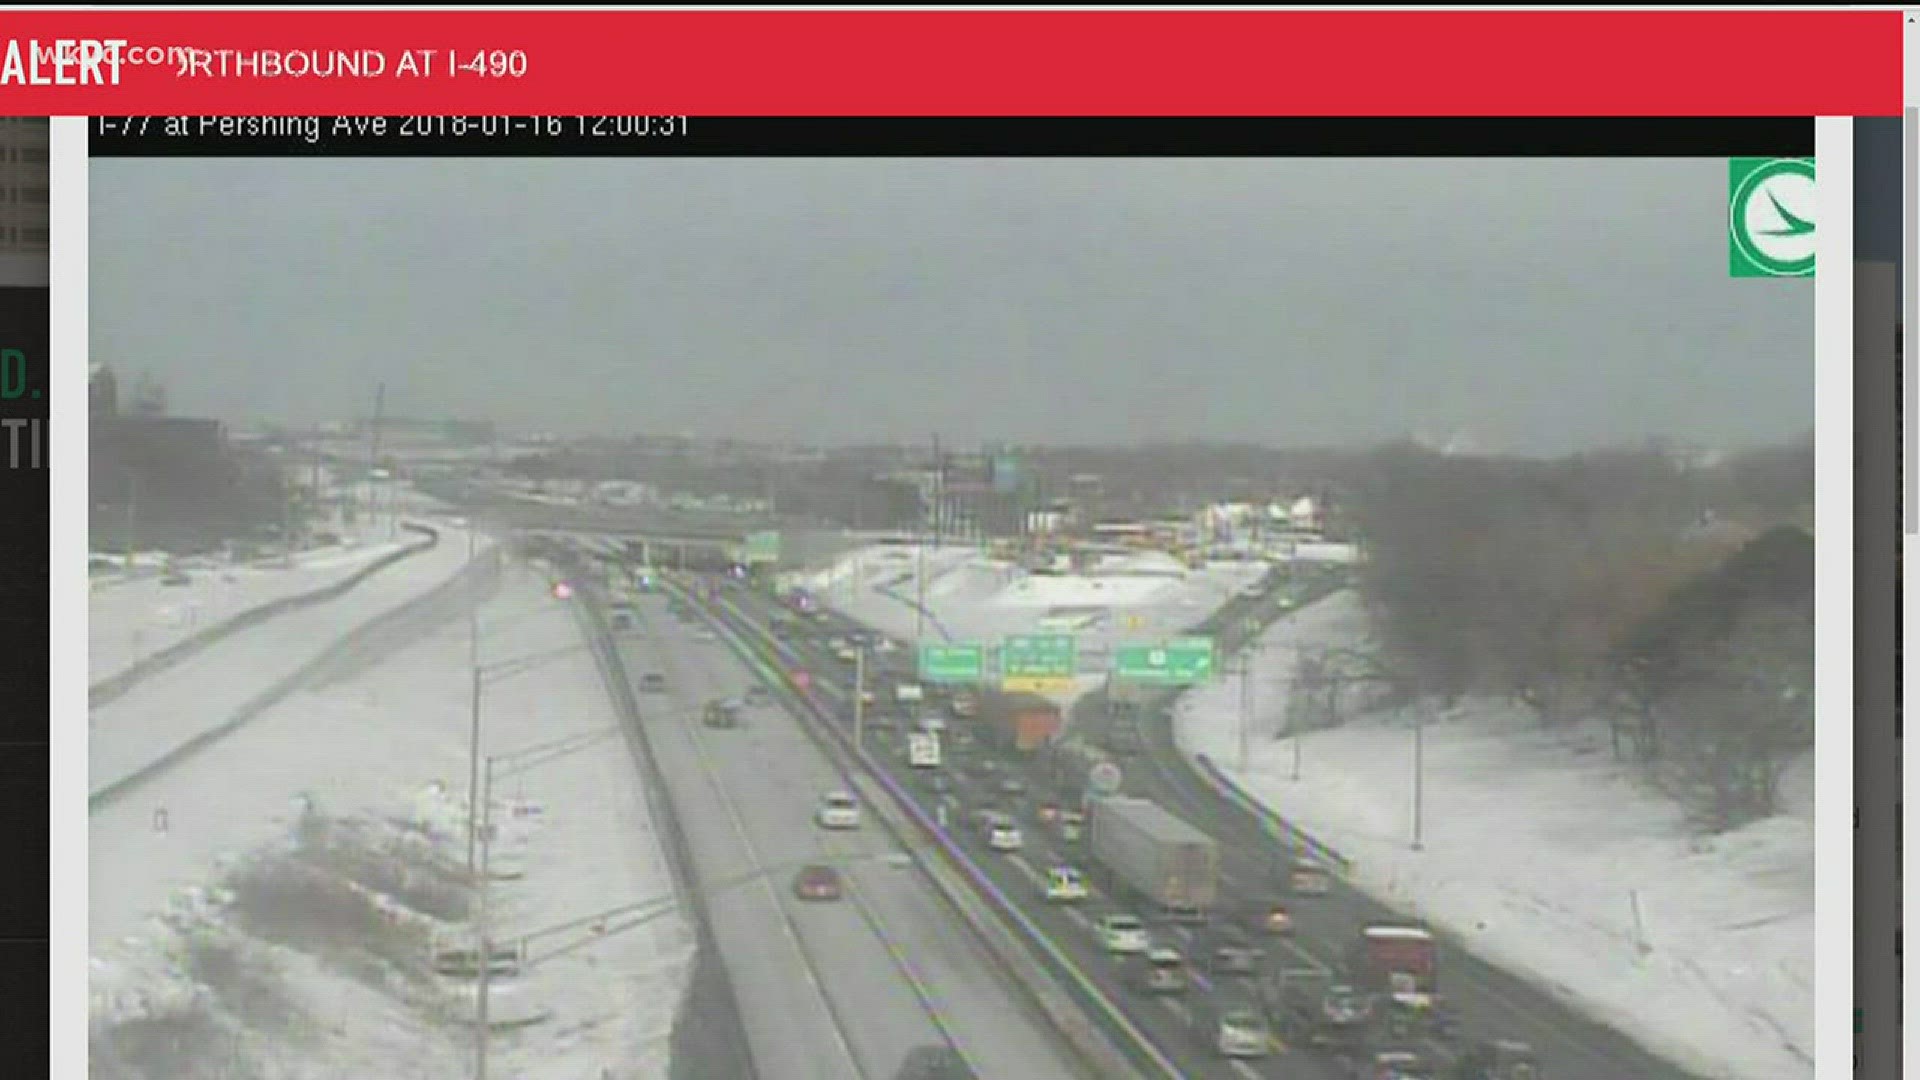 Jan. 16, 2018: Heavy traffic delays for drivers heading into downtown Cleveland because of a crash on I-77 North at I-490.